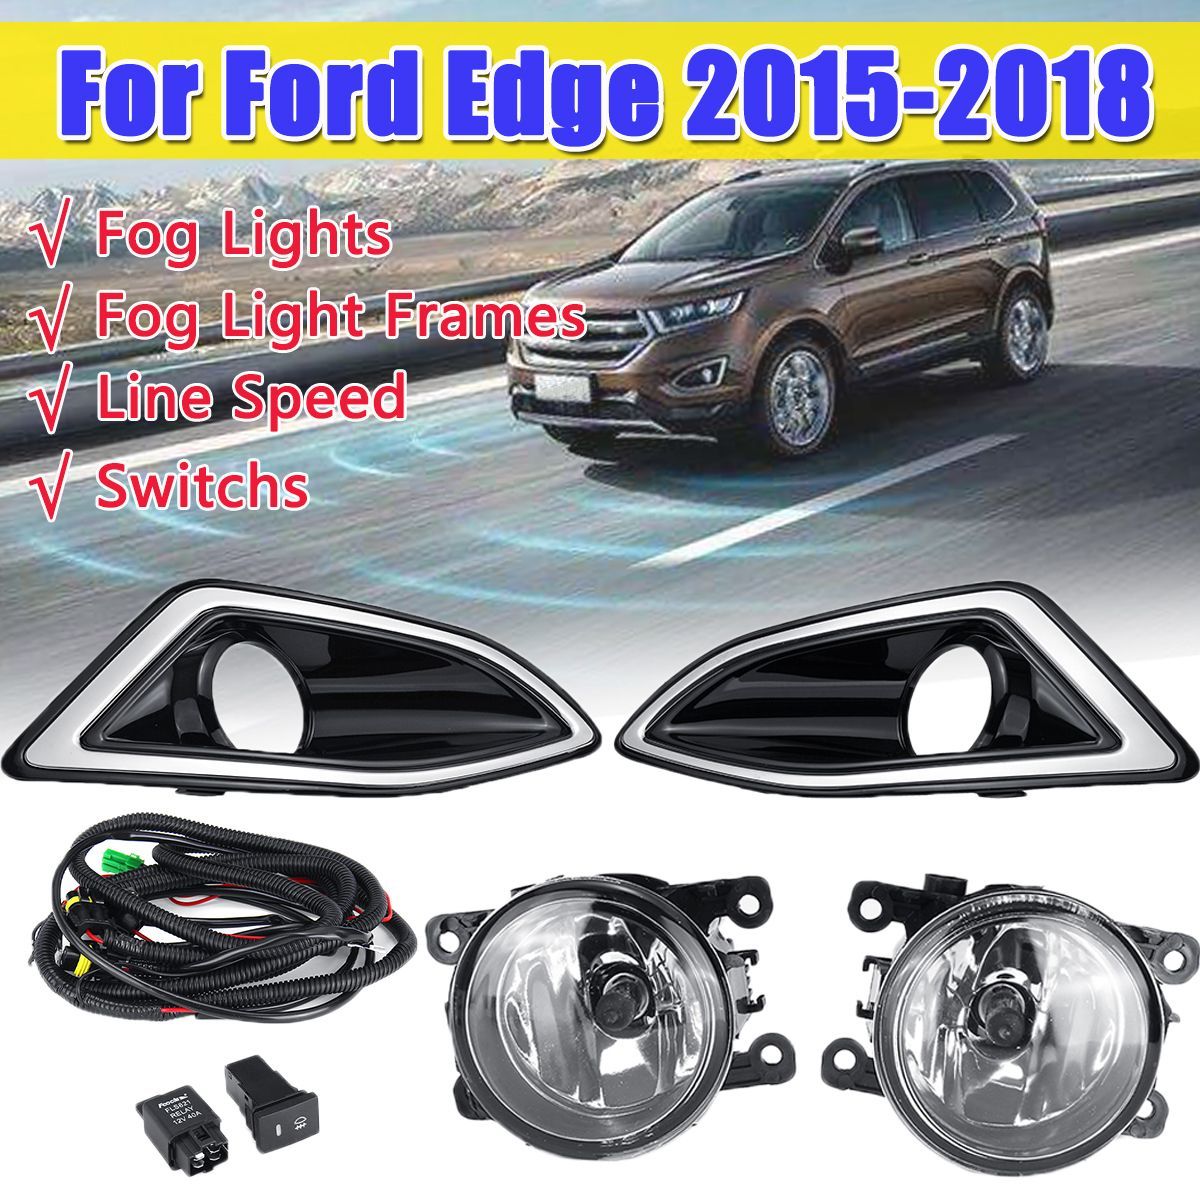 LED-Daytime-Running-Lights-DRL-Front-Fog-Lamps-with-Bulbs-Wiring-Harness-For-Ford-Edge-2015-2018-1550952